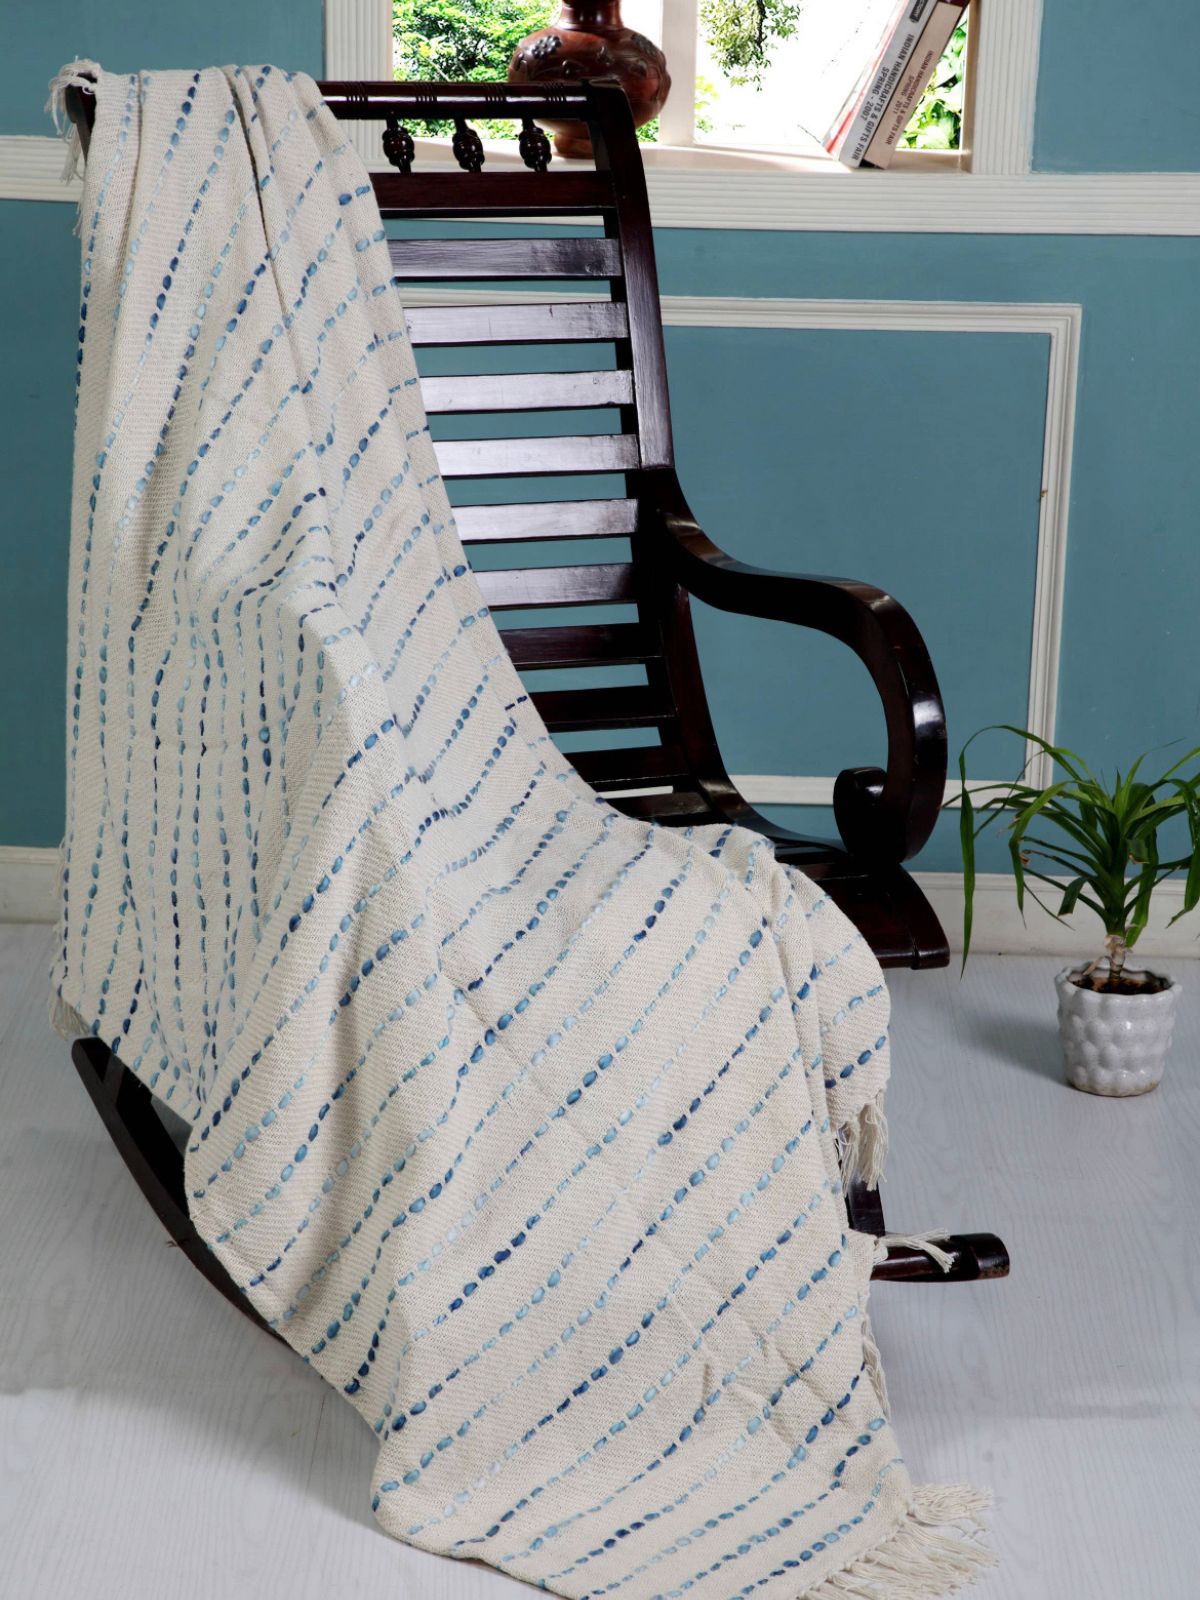 Oceanic Blue Interwoven Cotton Throw Blanket with Fringe.